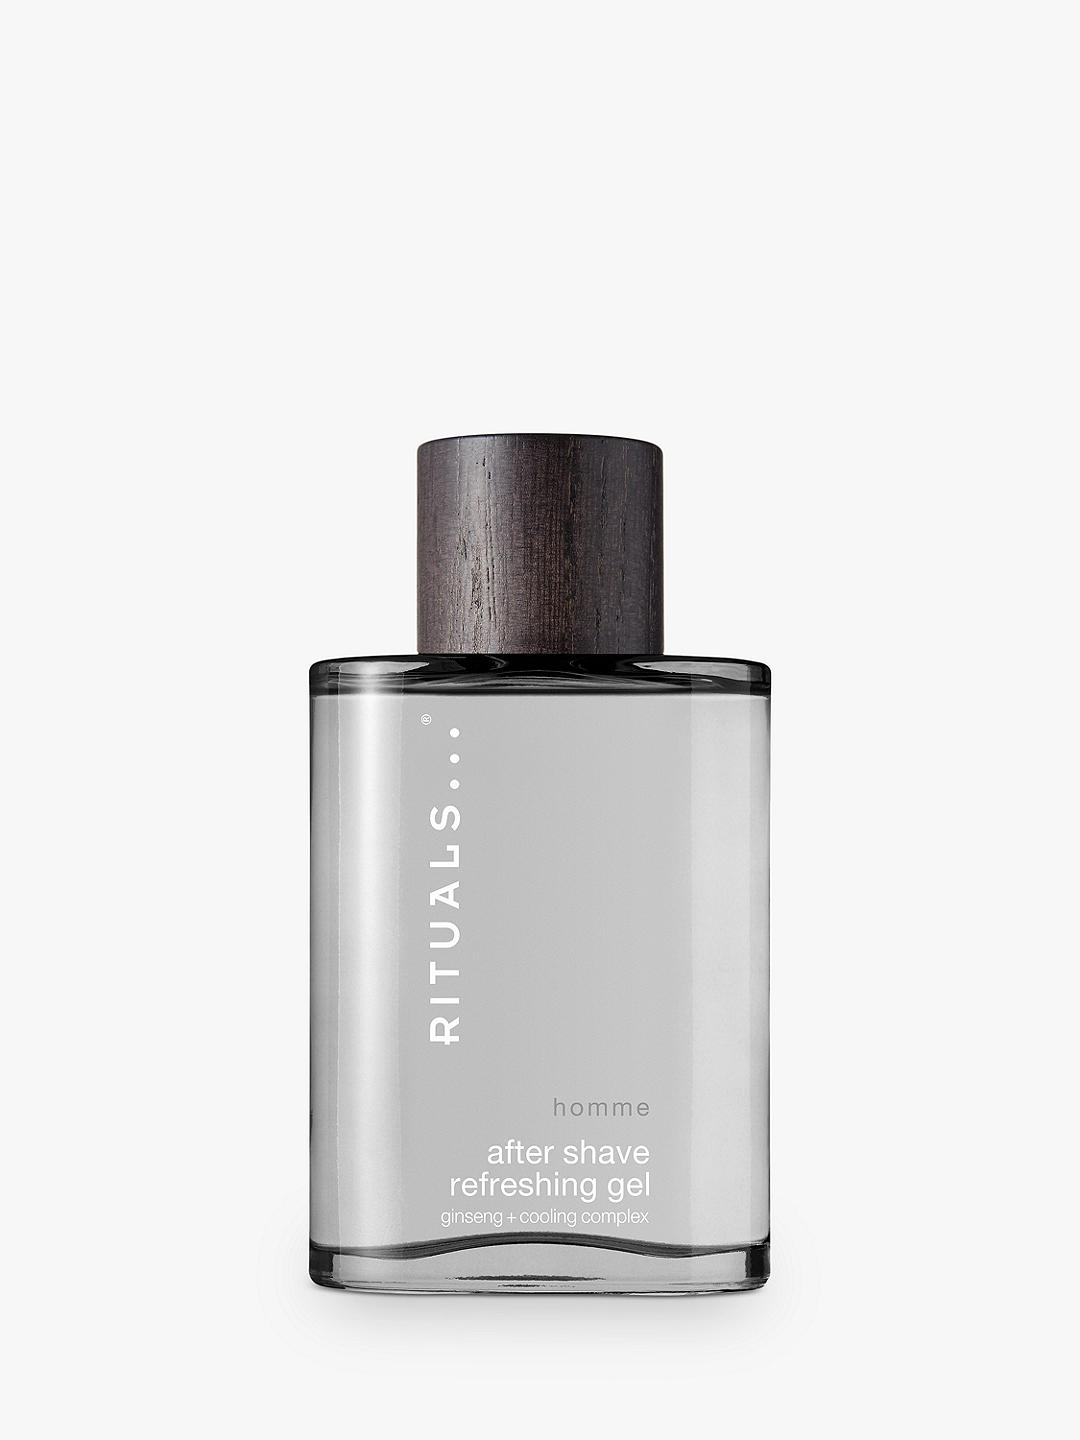 Rituals Homme After Shave Refreshing Gel, 100ml at John Lewis & Partners